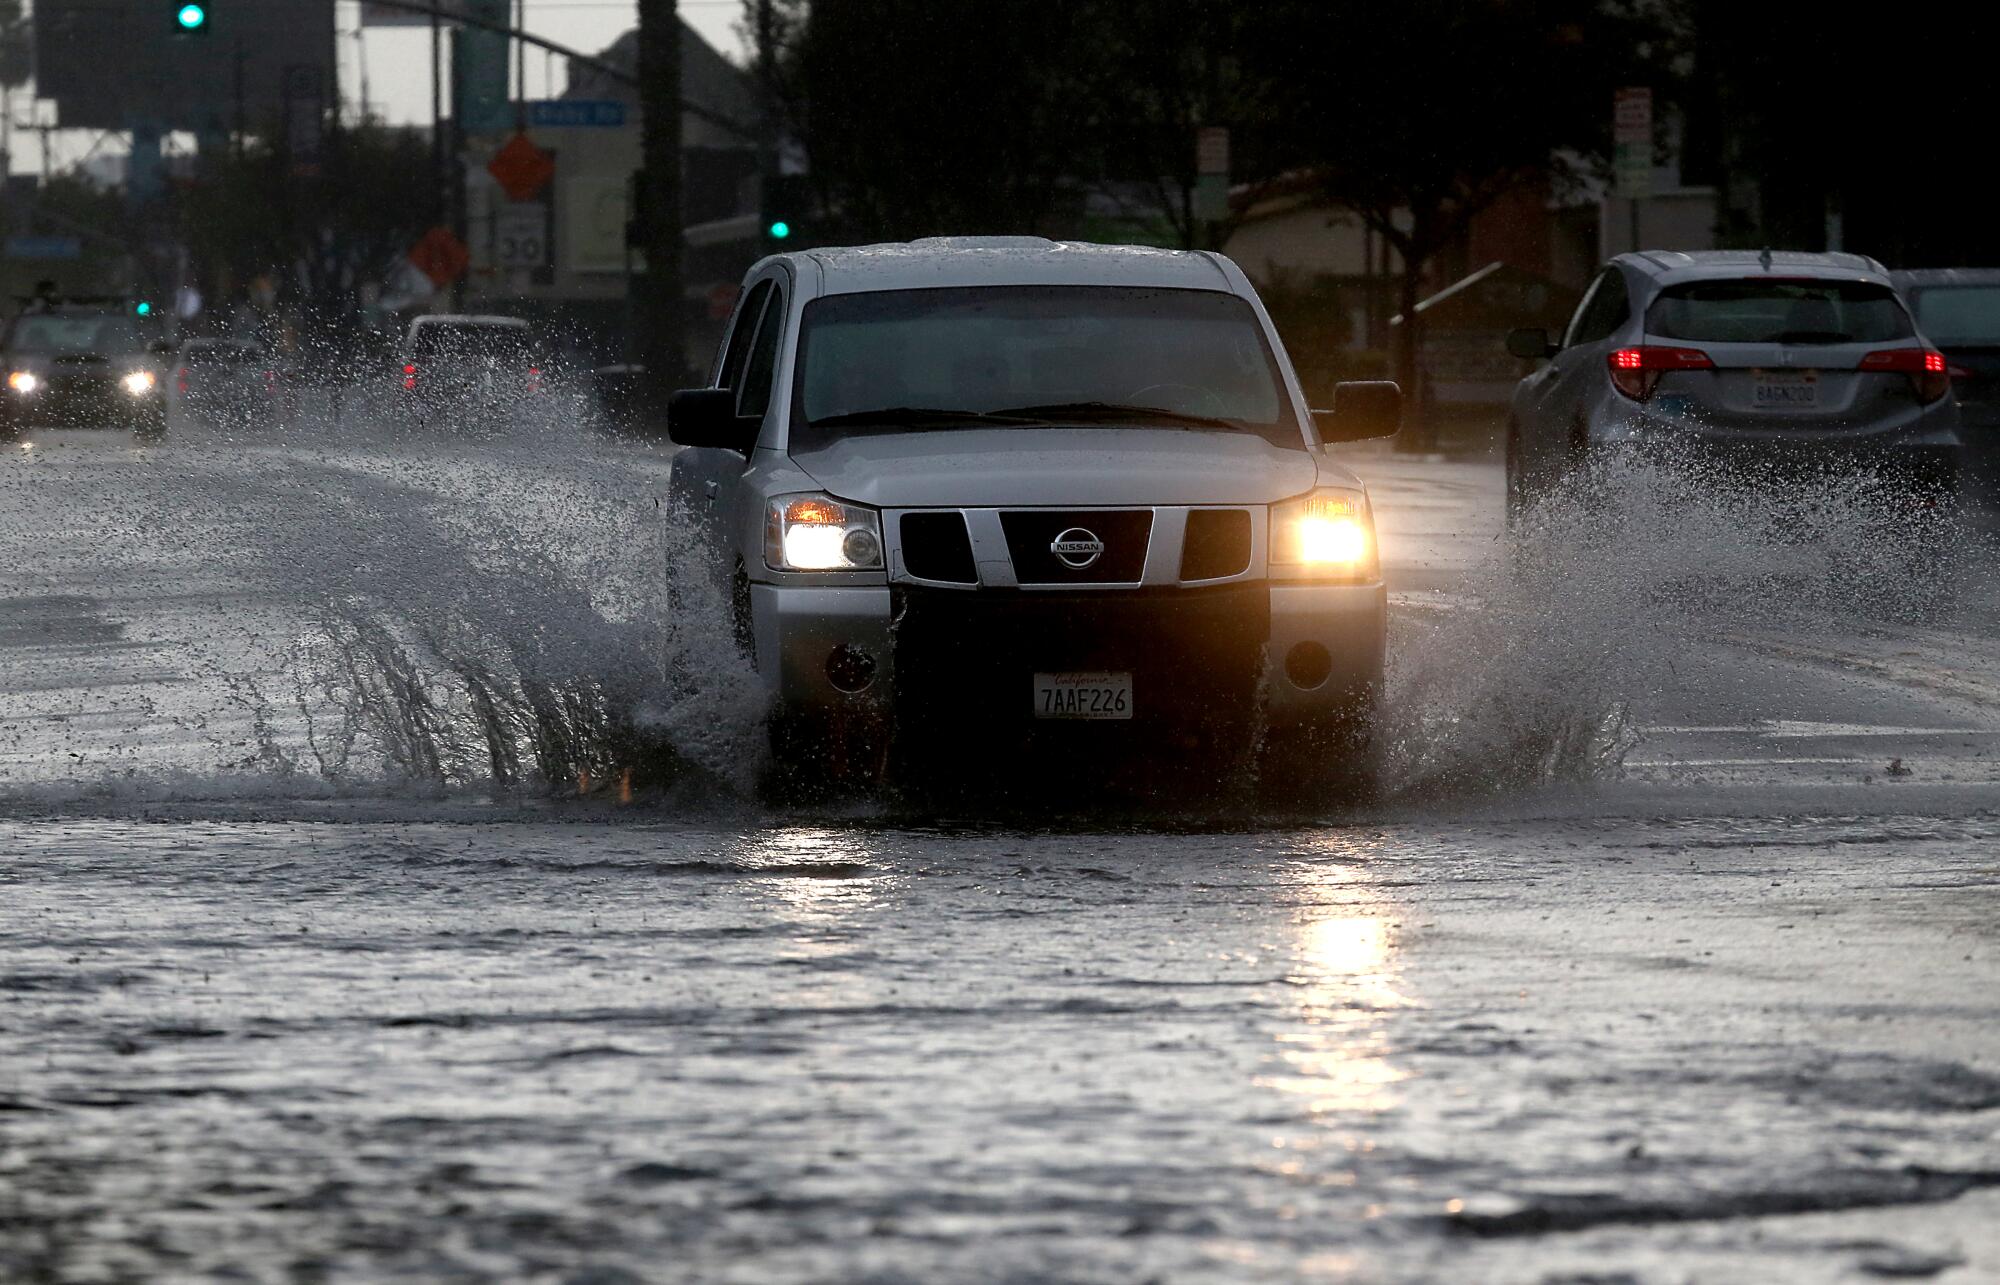 An SUV goes through a flooded part of a road, splashing water.